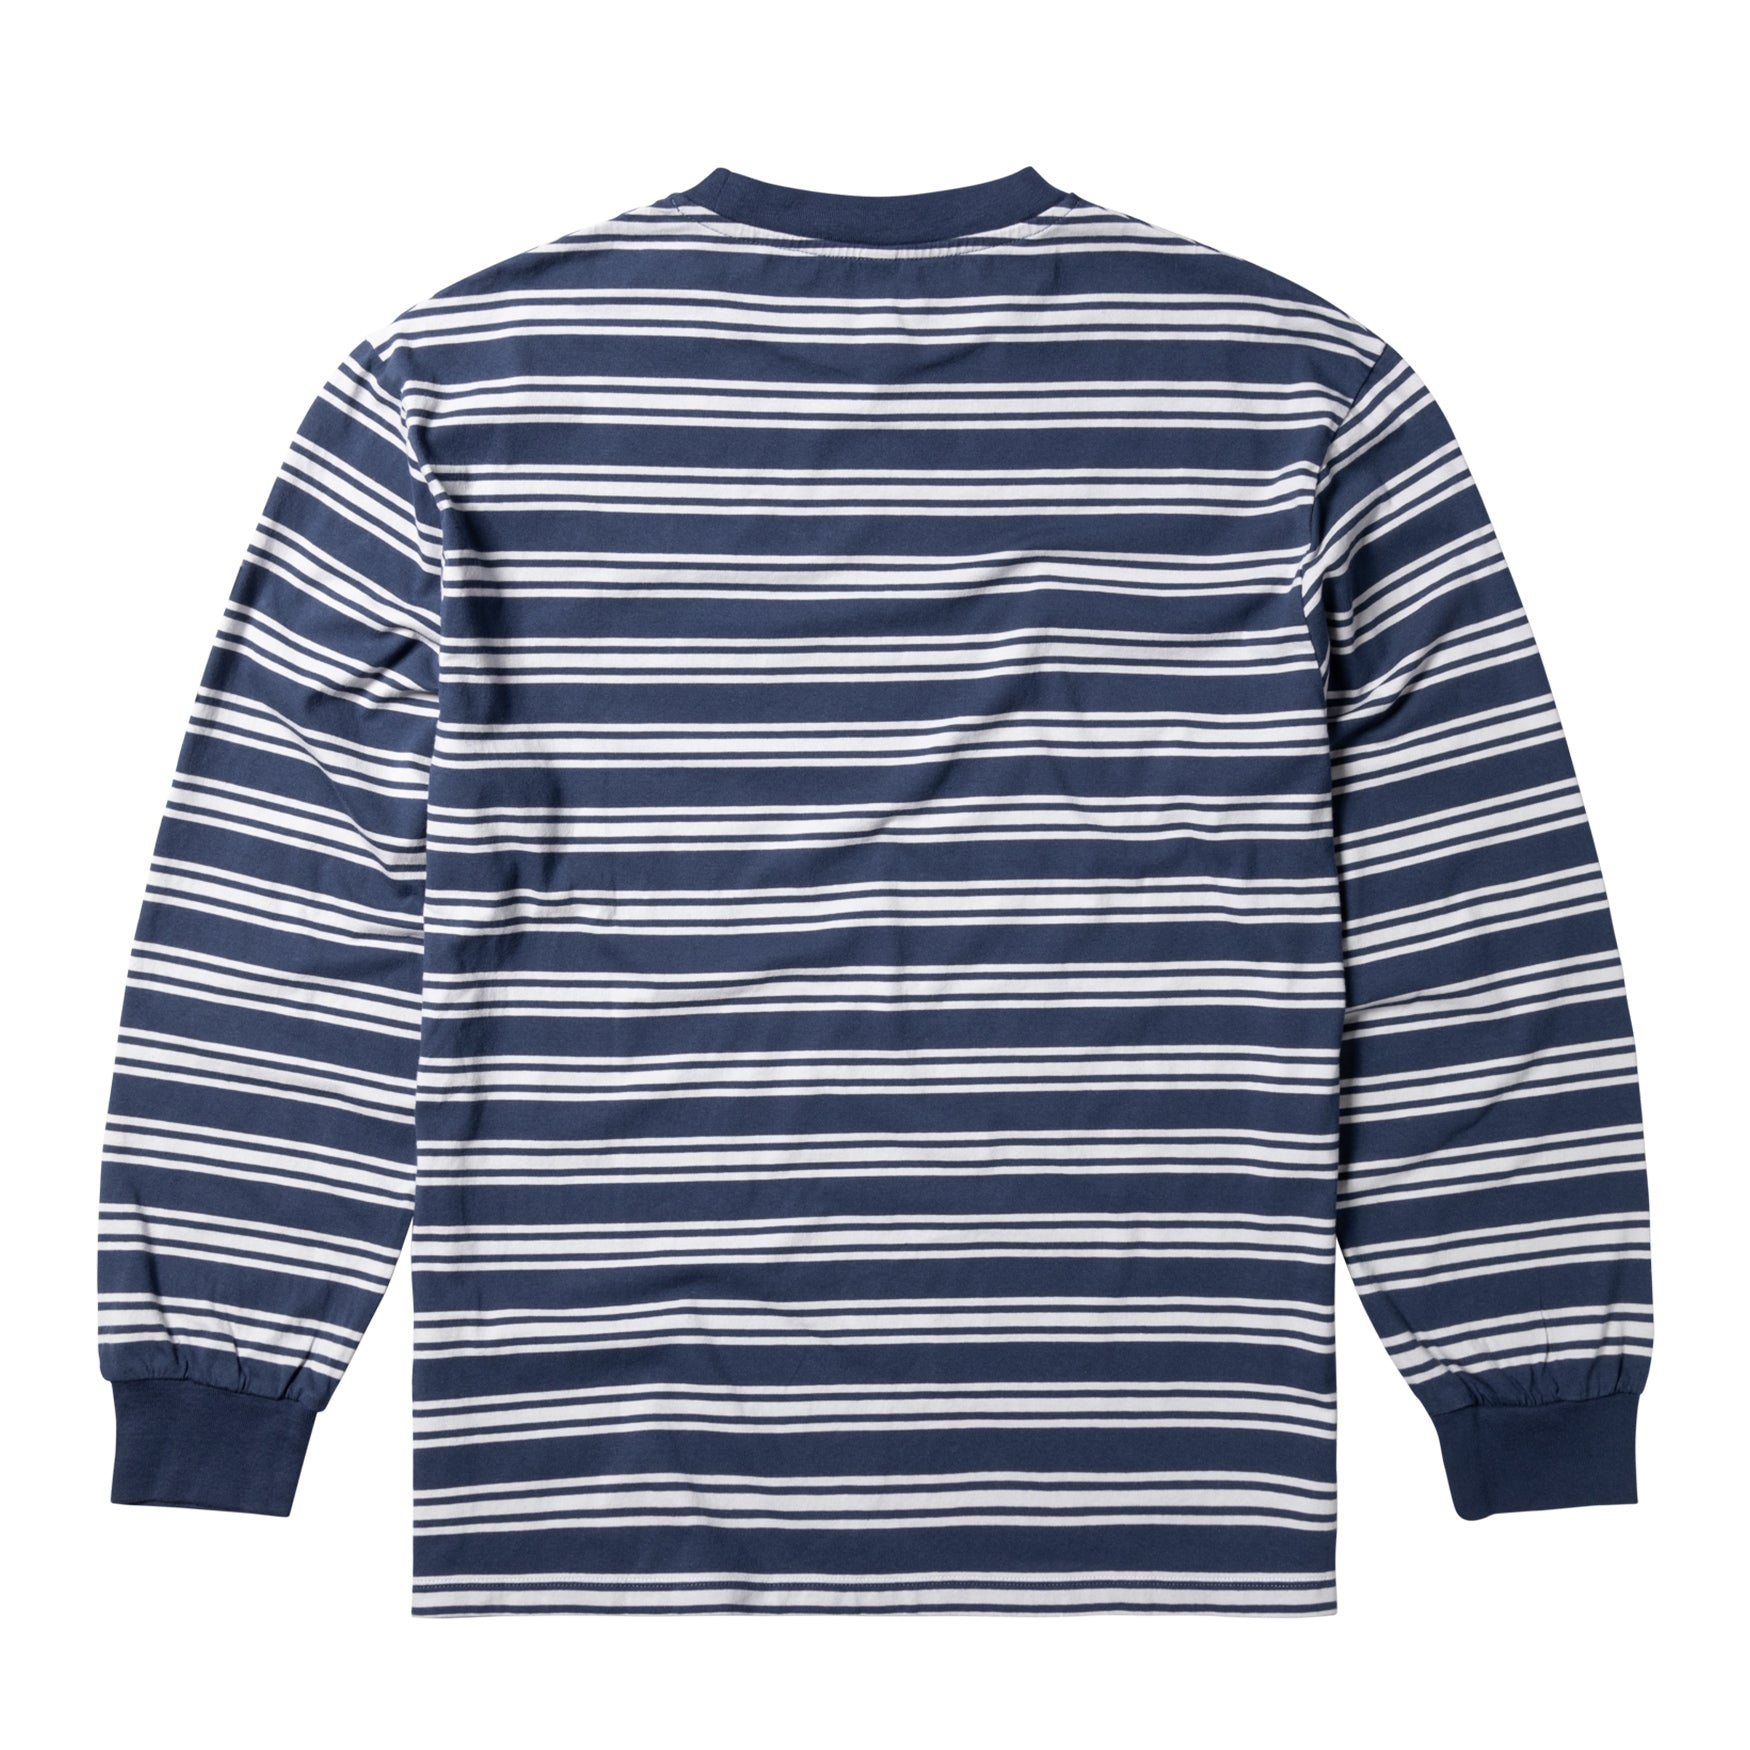 Long sleeve shirt from